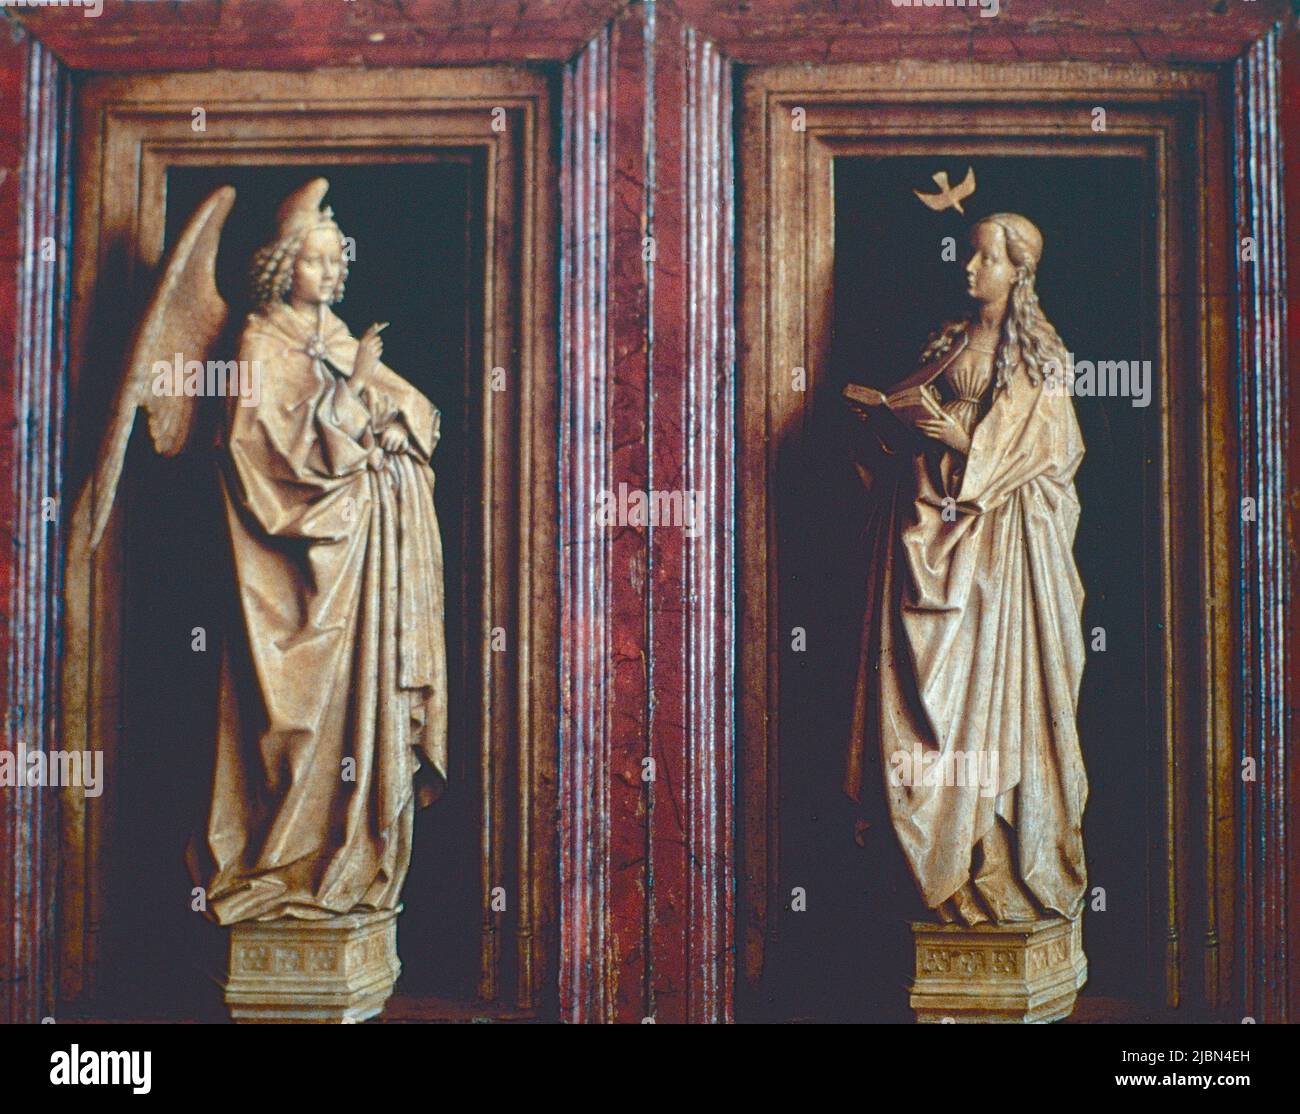 The Annunciation Diptych, painting by Dutch artist Jan van Eyck, 1433-35 Stock Photo